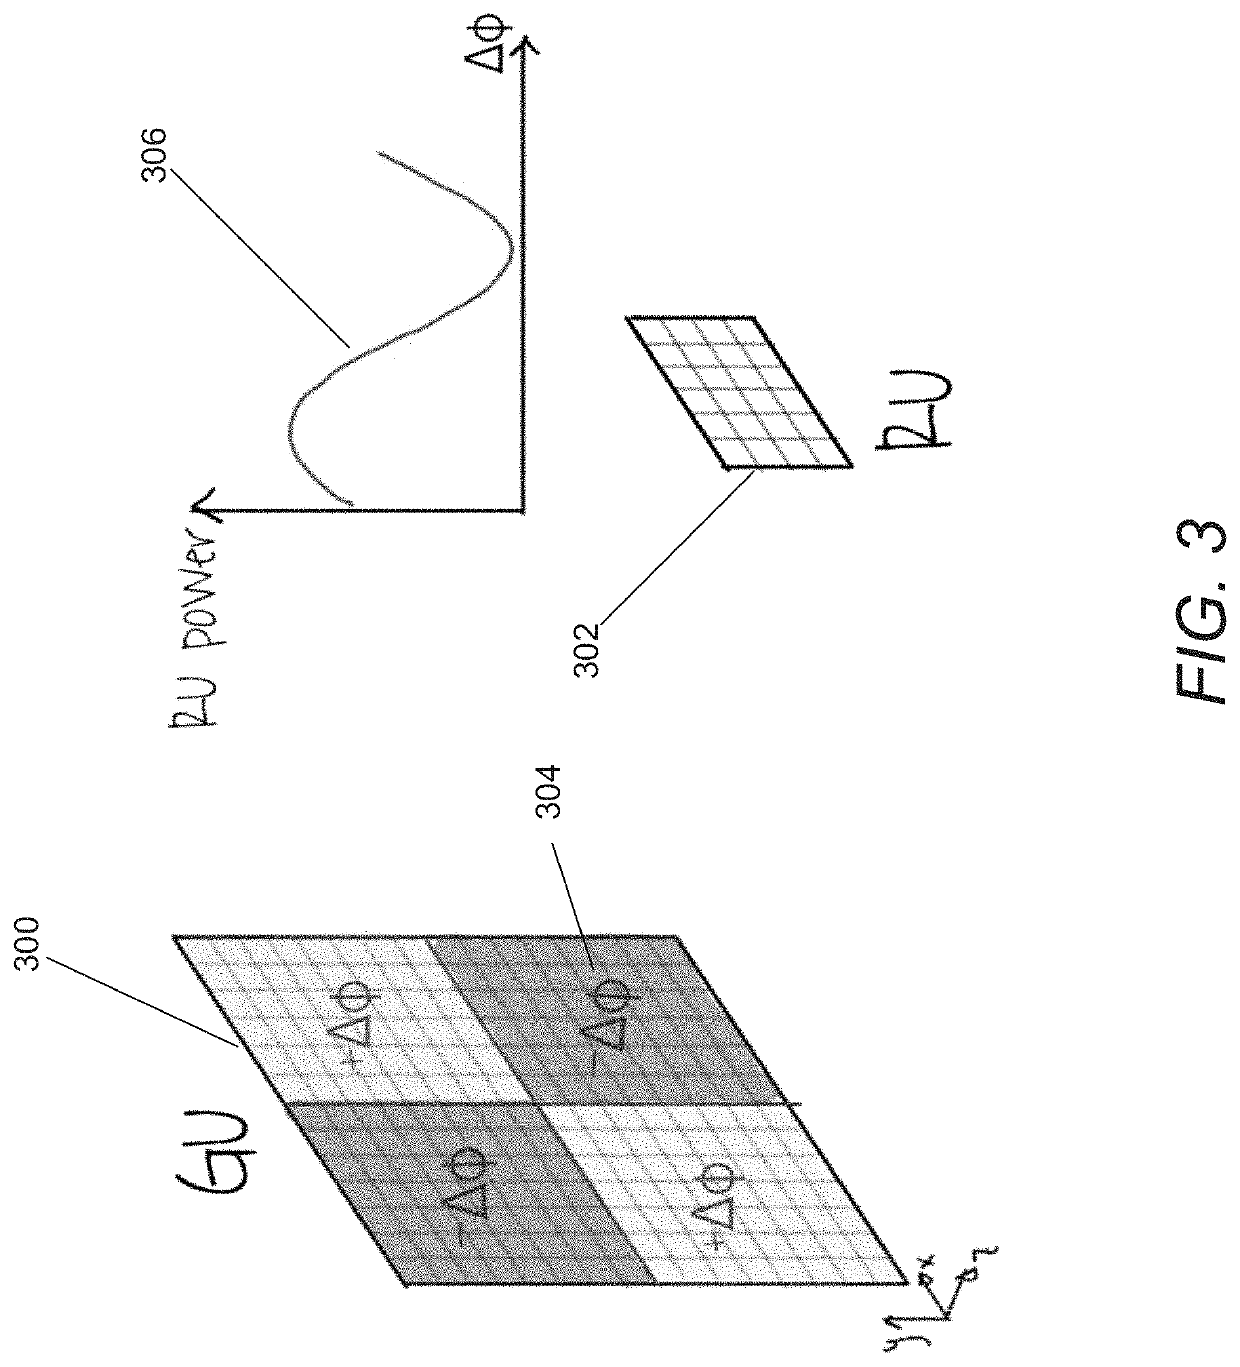 Dynamic focusing and tracking for wireless power transfer arrays